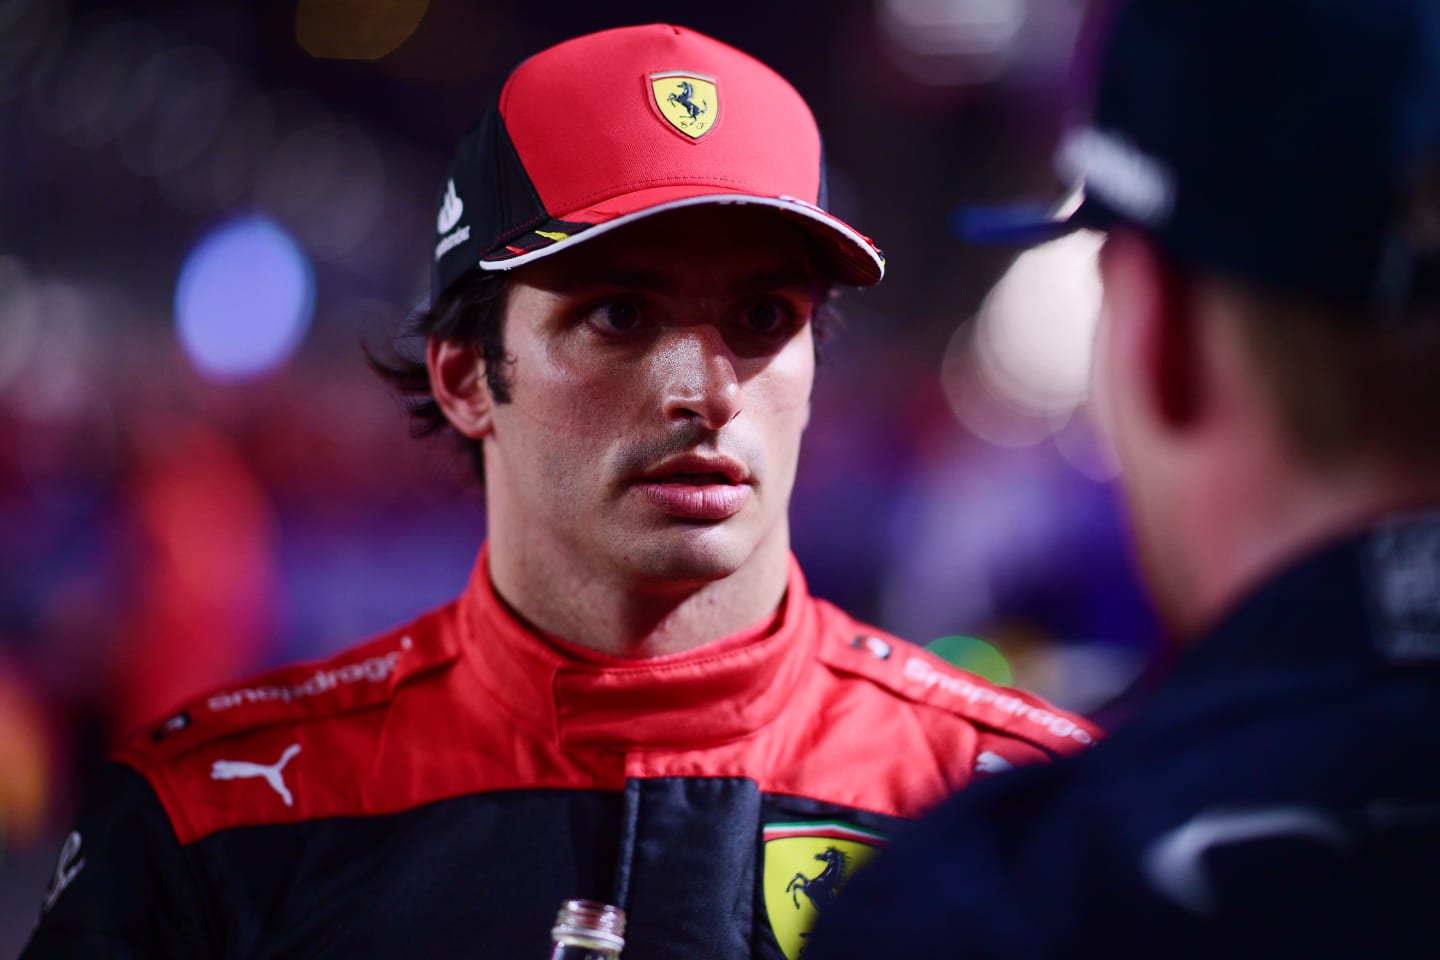 JEDDAH, SAUDI ARABIA - MARCH 27: Third placed Carlos Sainz of Spain and Ferrari talks with Race winner Max Verstappen of the Netherlands and Oracle Red Bull Racing in parc ferme during the F1 Grand Prix of Saudi Arabia at the Jeddah Corniche Circuit on March 27, 2022 in Jeddah, Saudi Arabia. (Photo by Mario Renzi - Formula 1/Formula 1 via Getty Images)